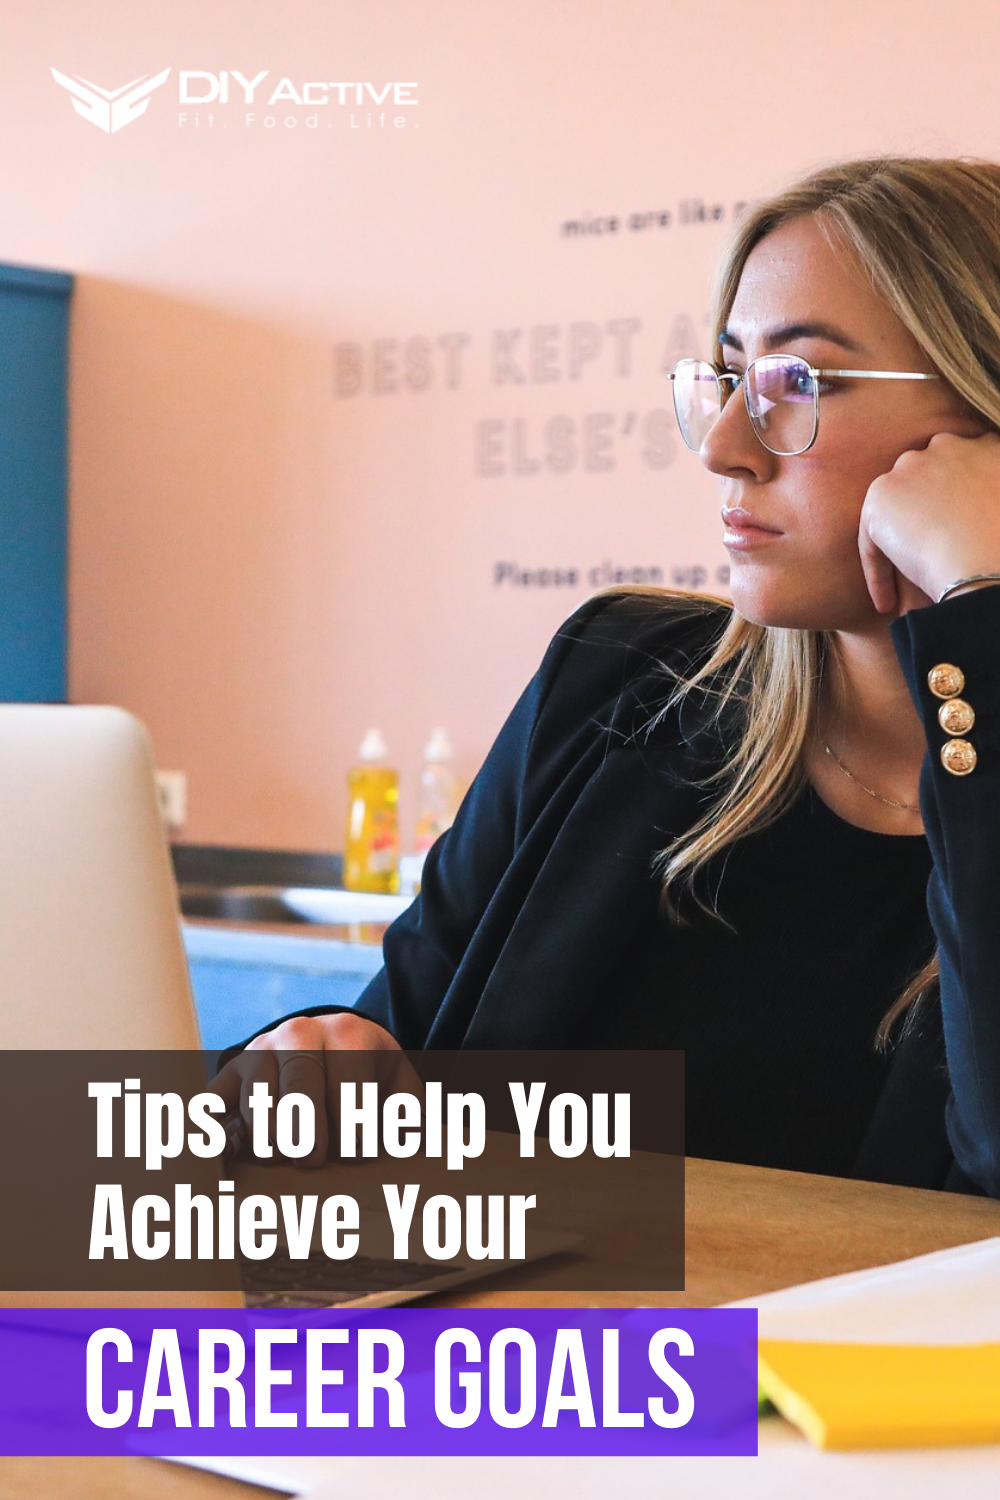 Tips to Help You Achieve Your Career Goals